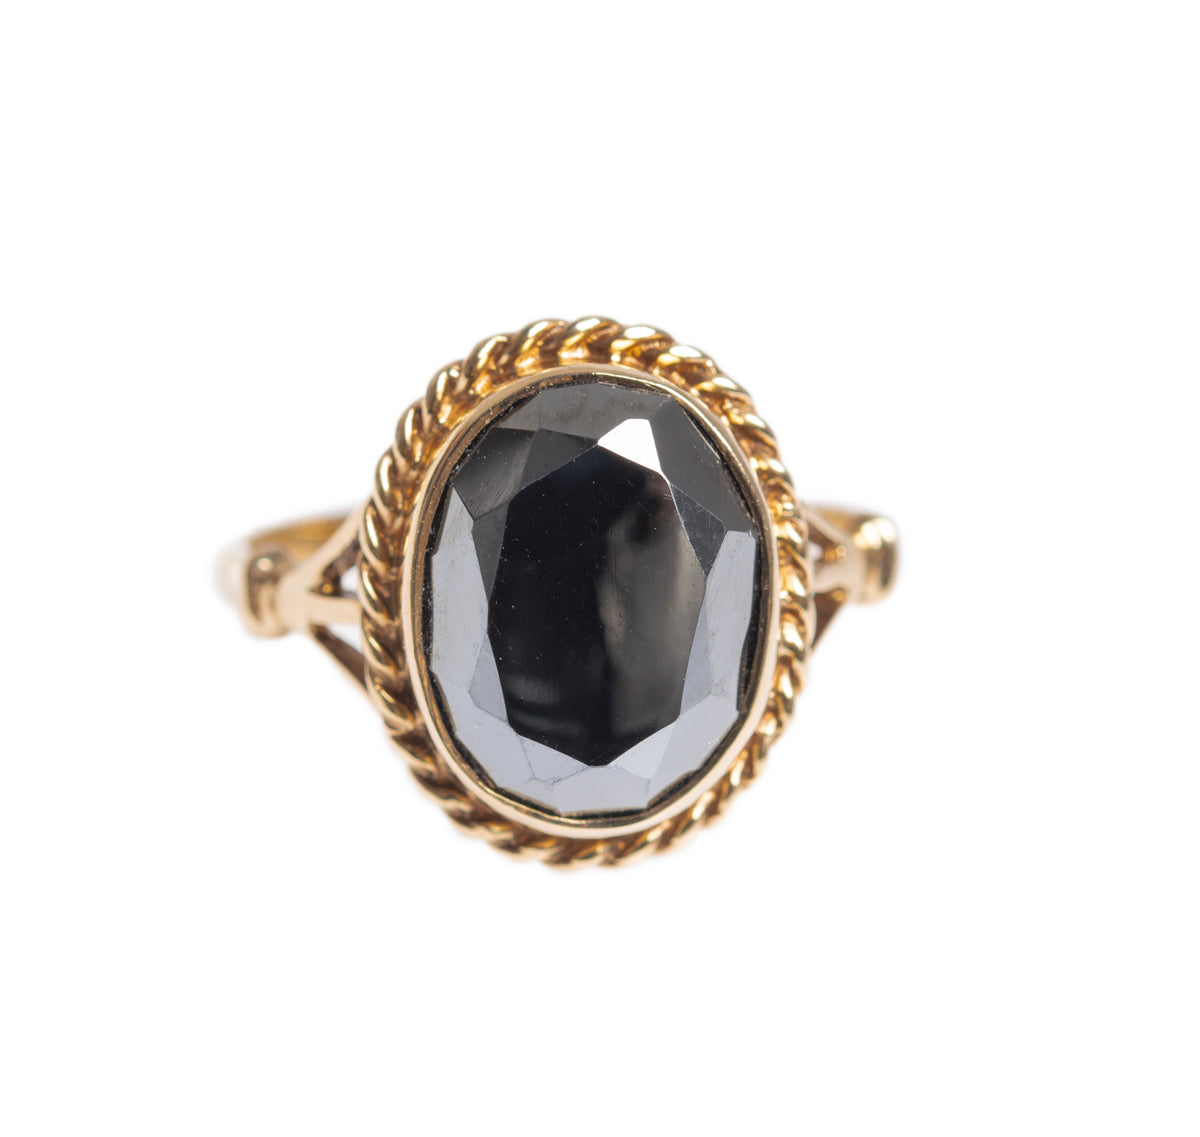 Vintage 9ct Gold Gemstone Ring Oval Facet Cut Hematite 1960's UK Size M (A1429)